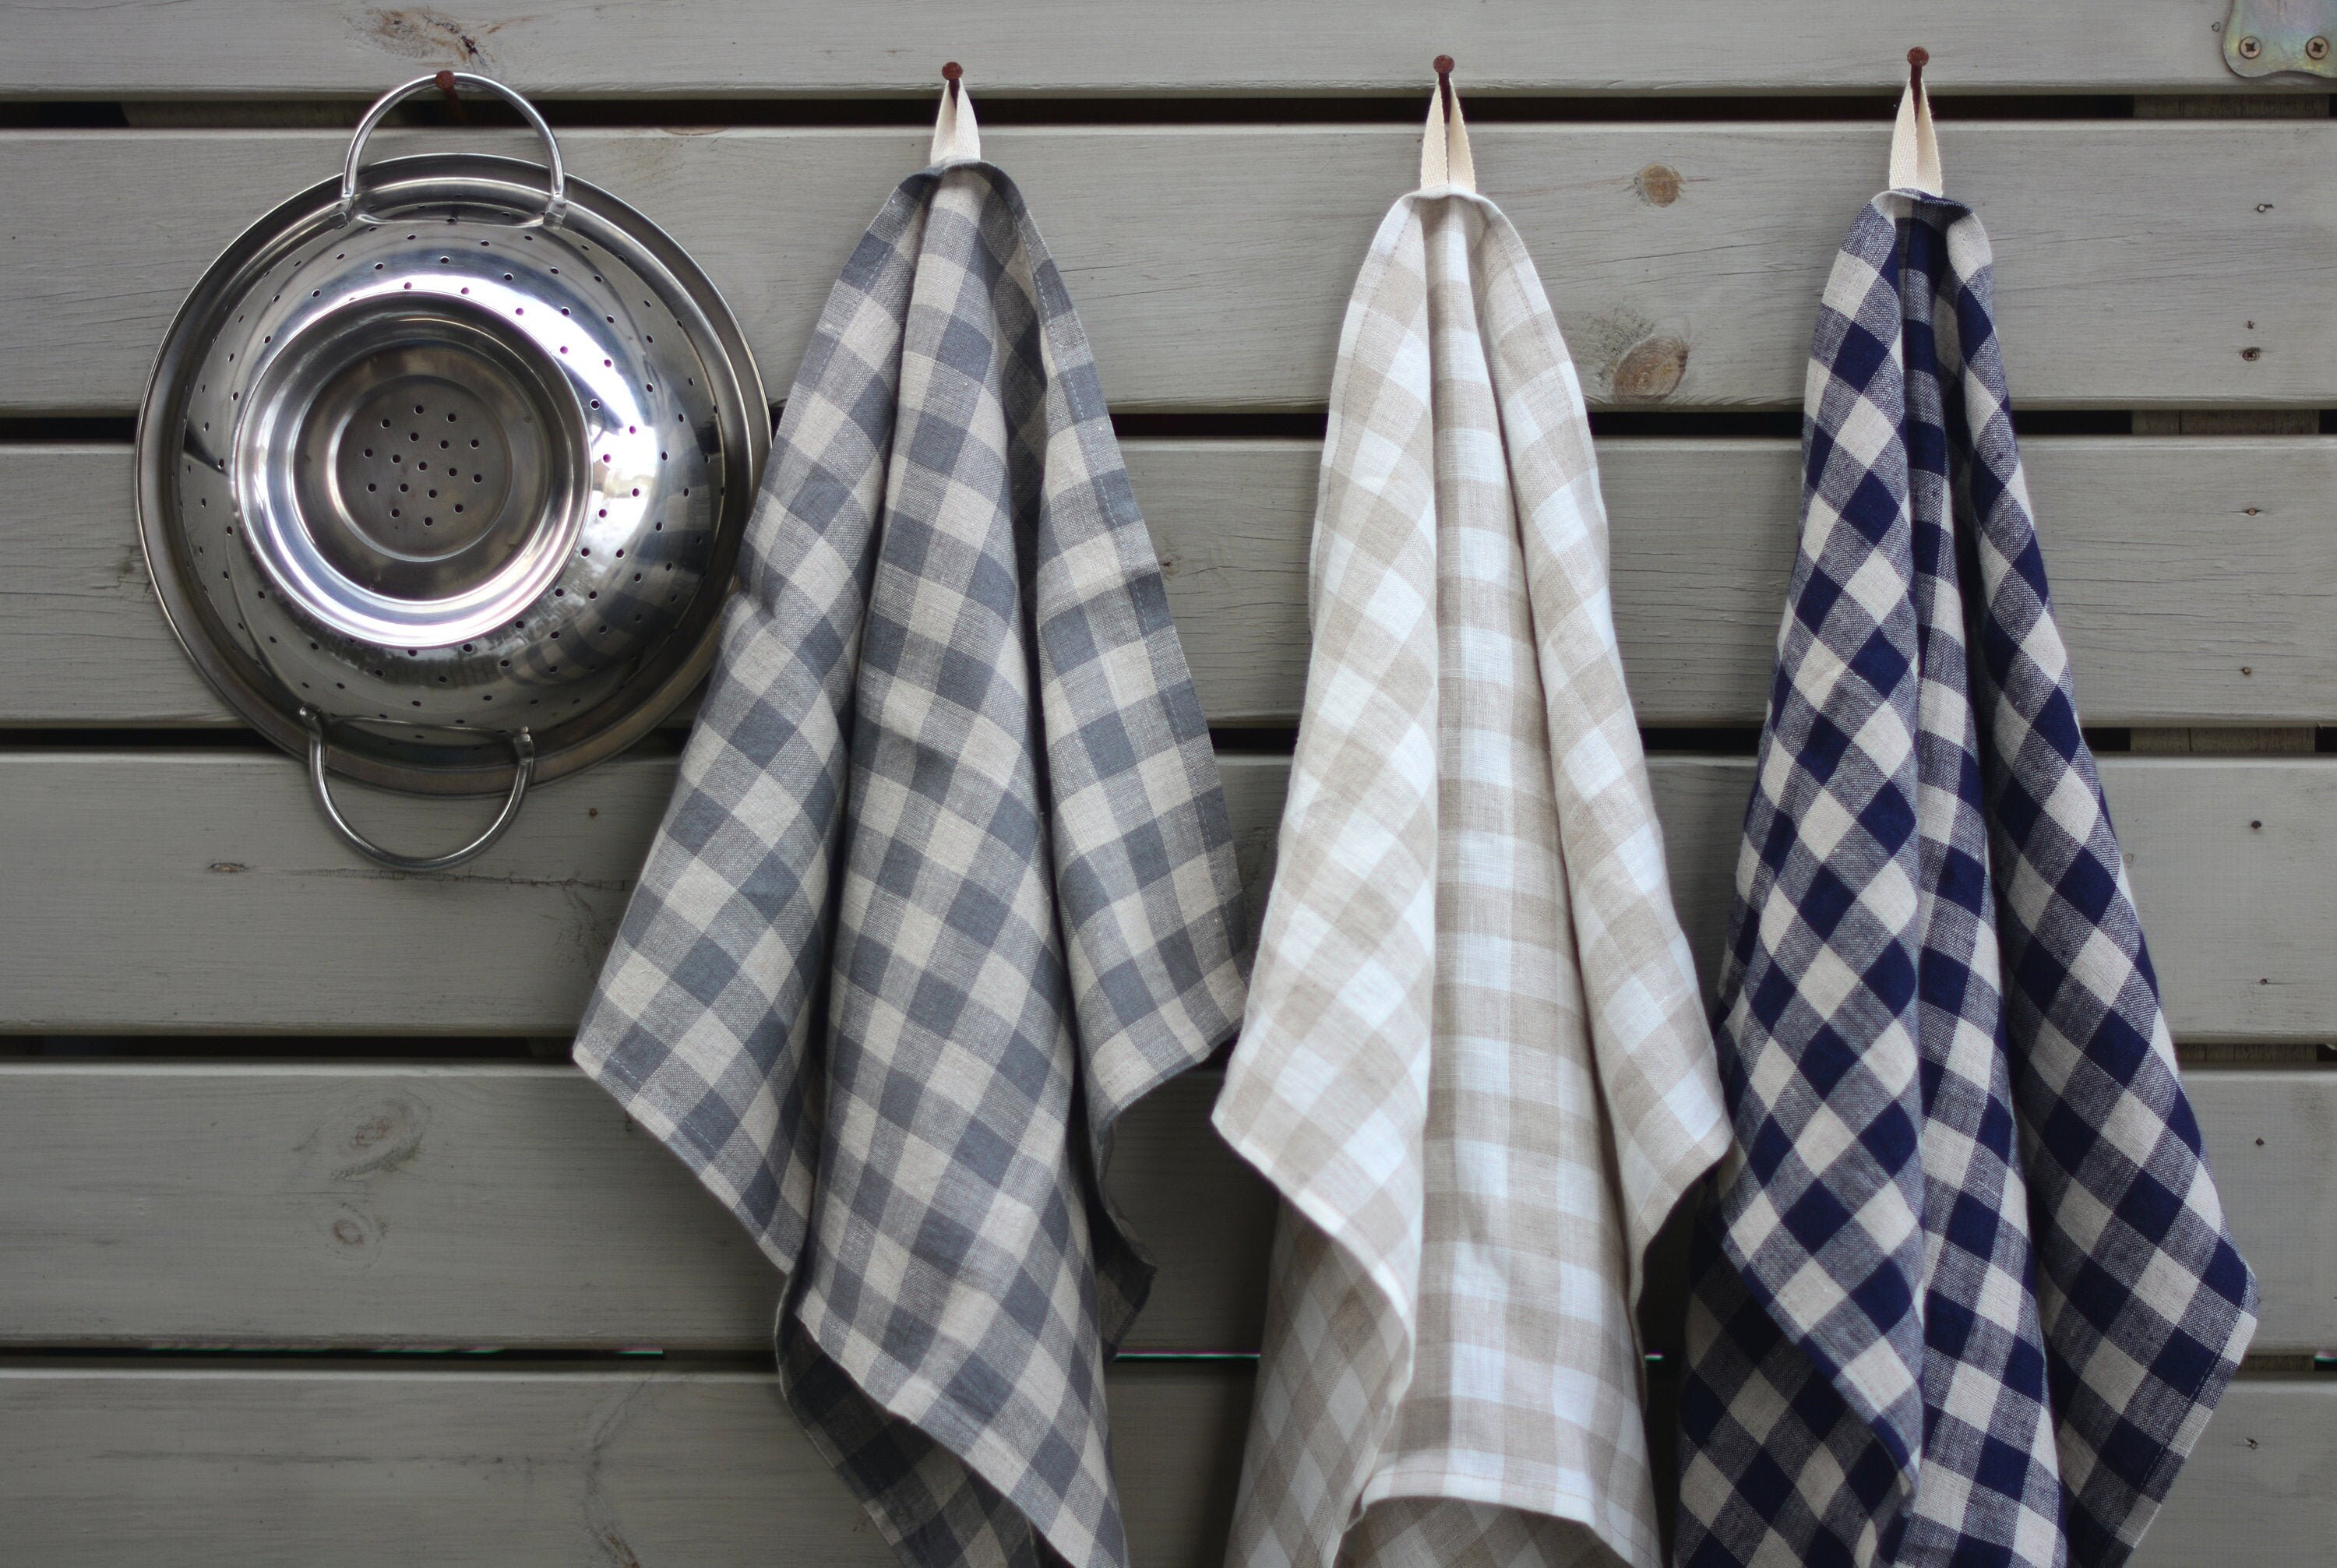 Black and White Buffalo Plaid Kitchen Towels - Set of 6 Highly Absorbent,  100% Cotton, Lint-Free Kitchen Towels with Hanging Loop - Use as Kitchen